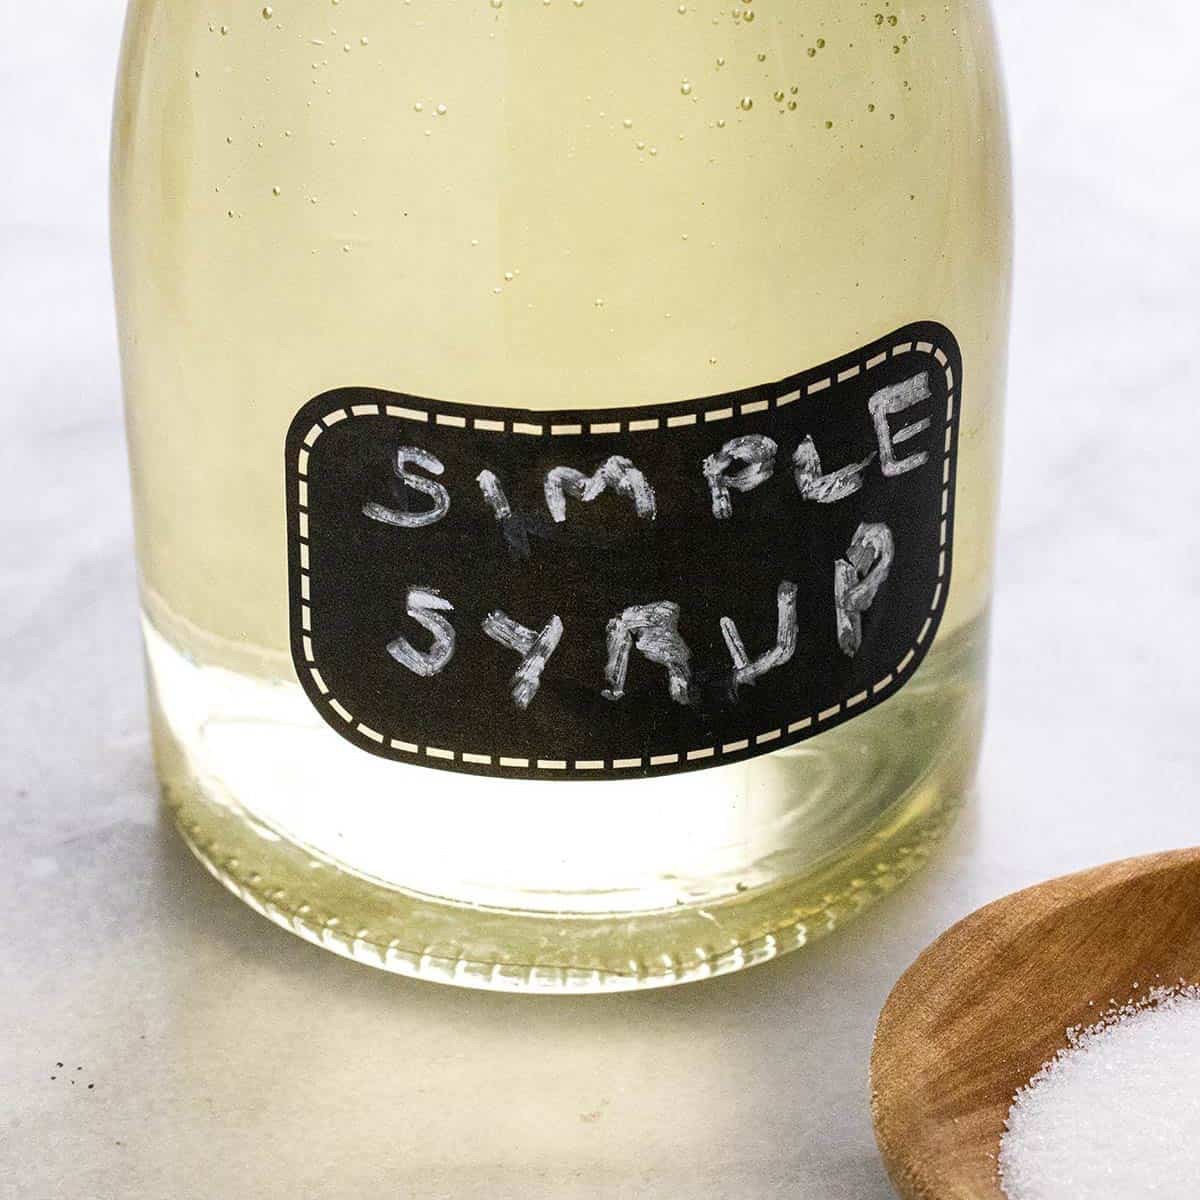 19-simple-syrup-nutrition-facts